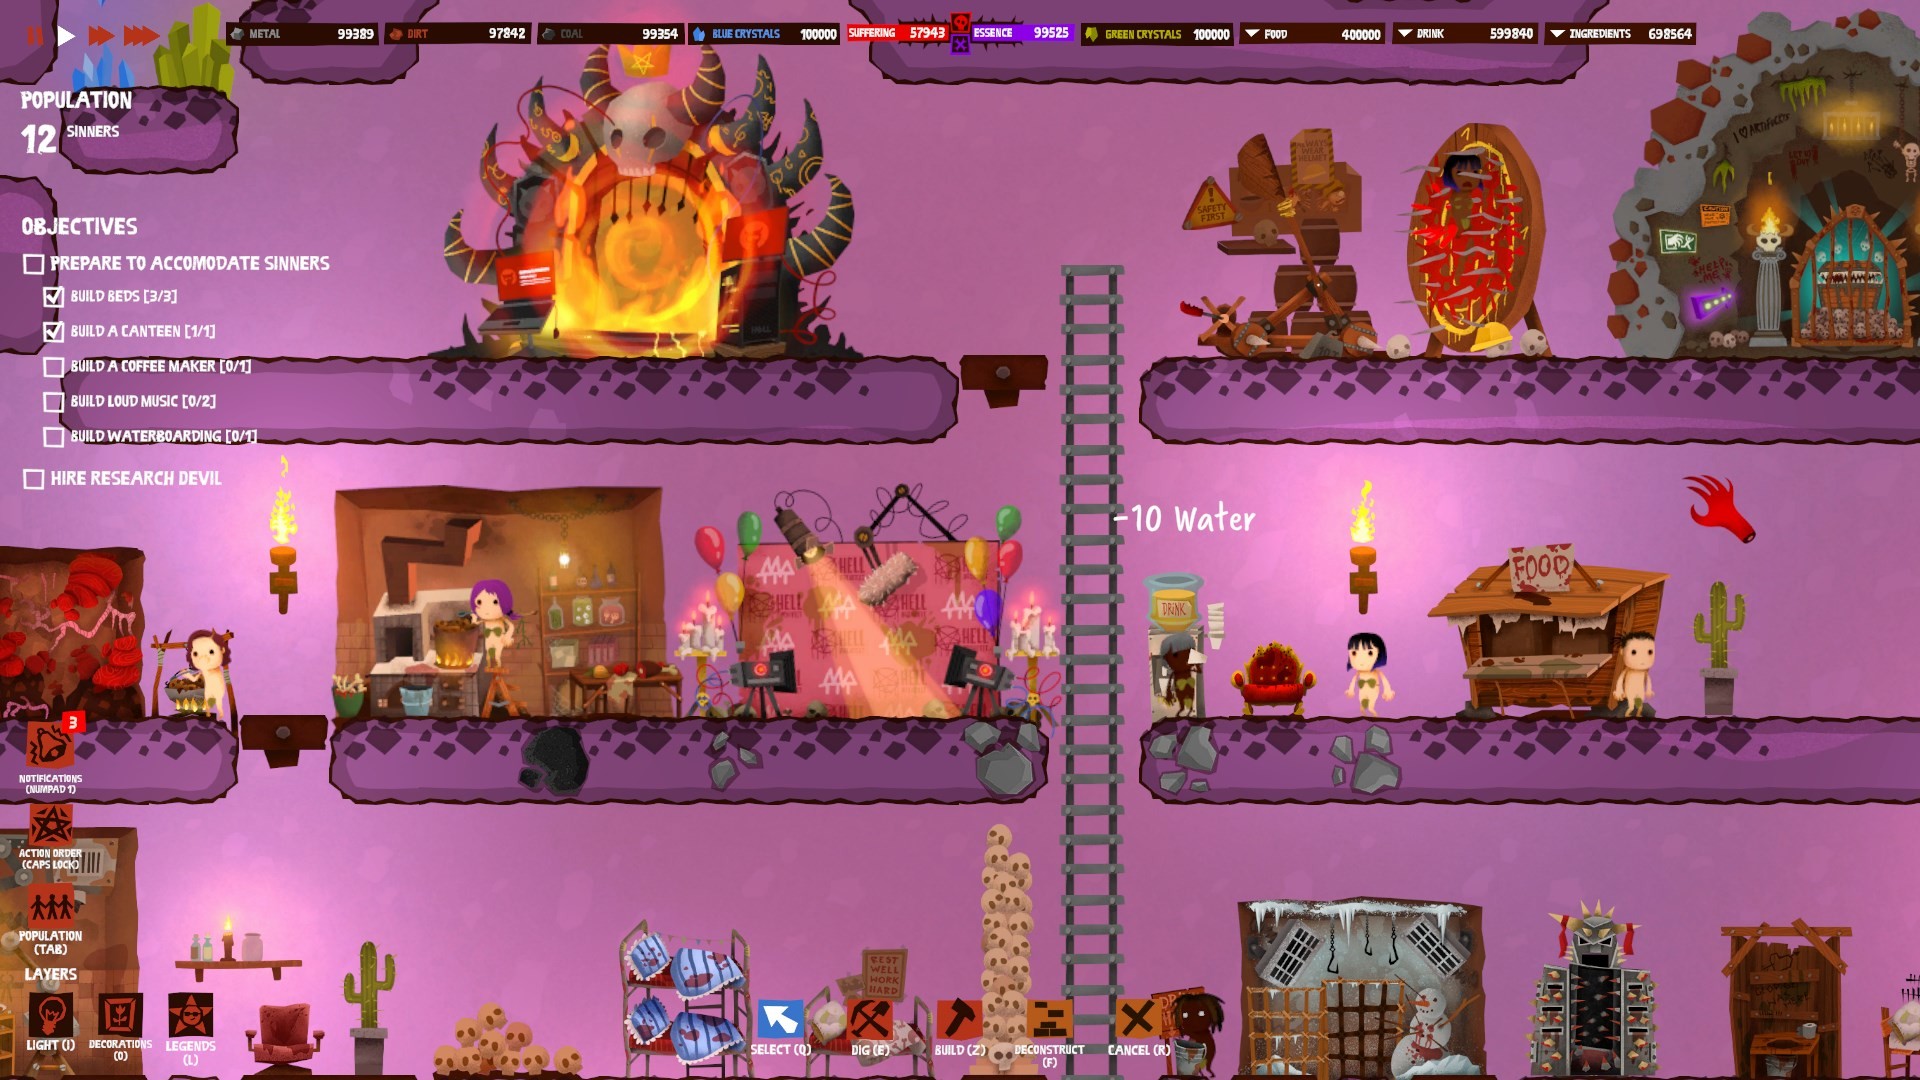 hell architect free download